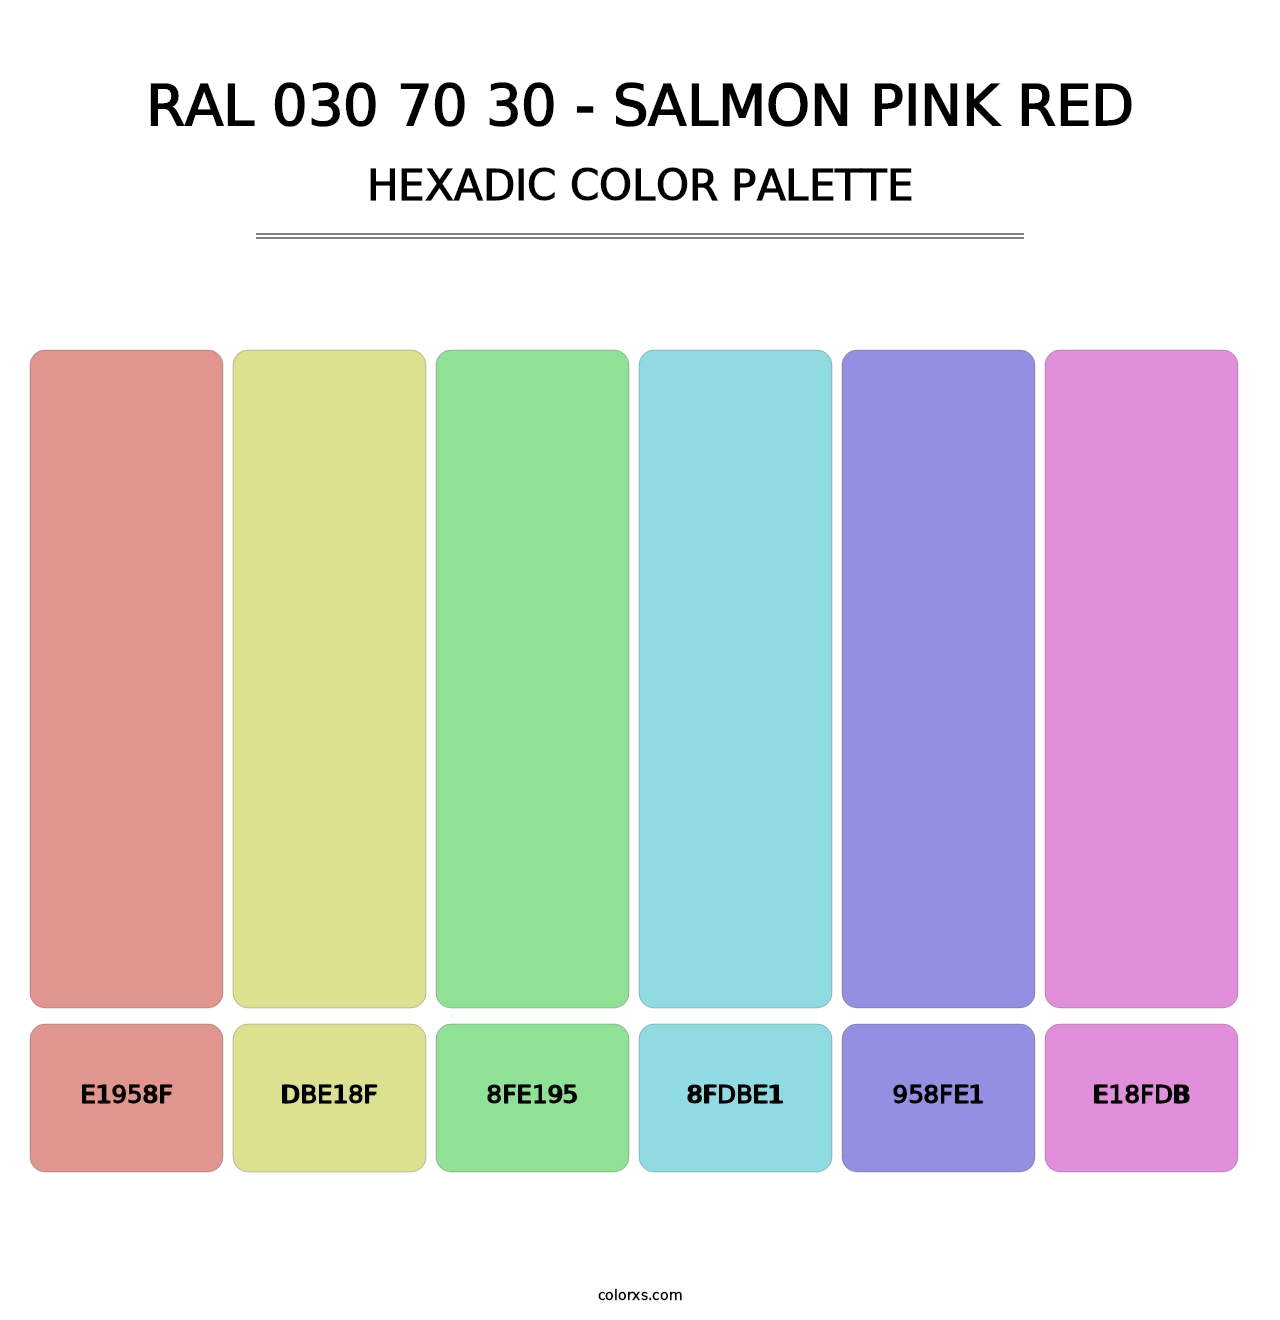 RAL 030 70 30 - Salmon Pink Red - Hexadic Color Palette